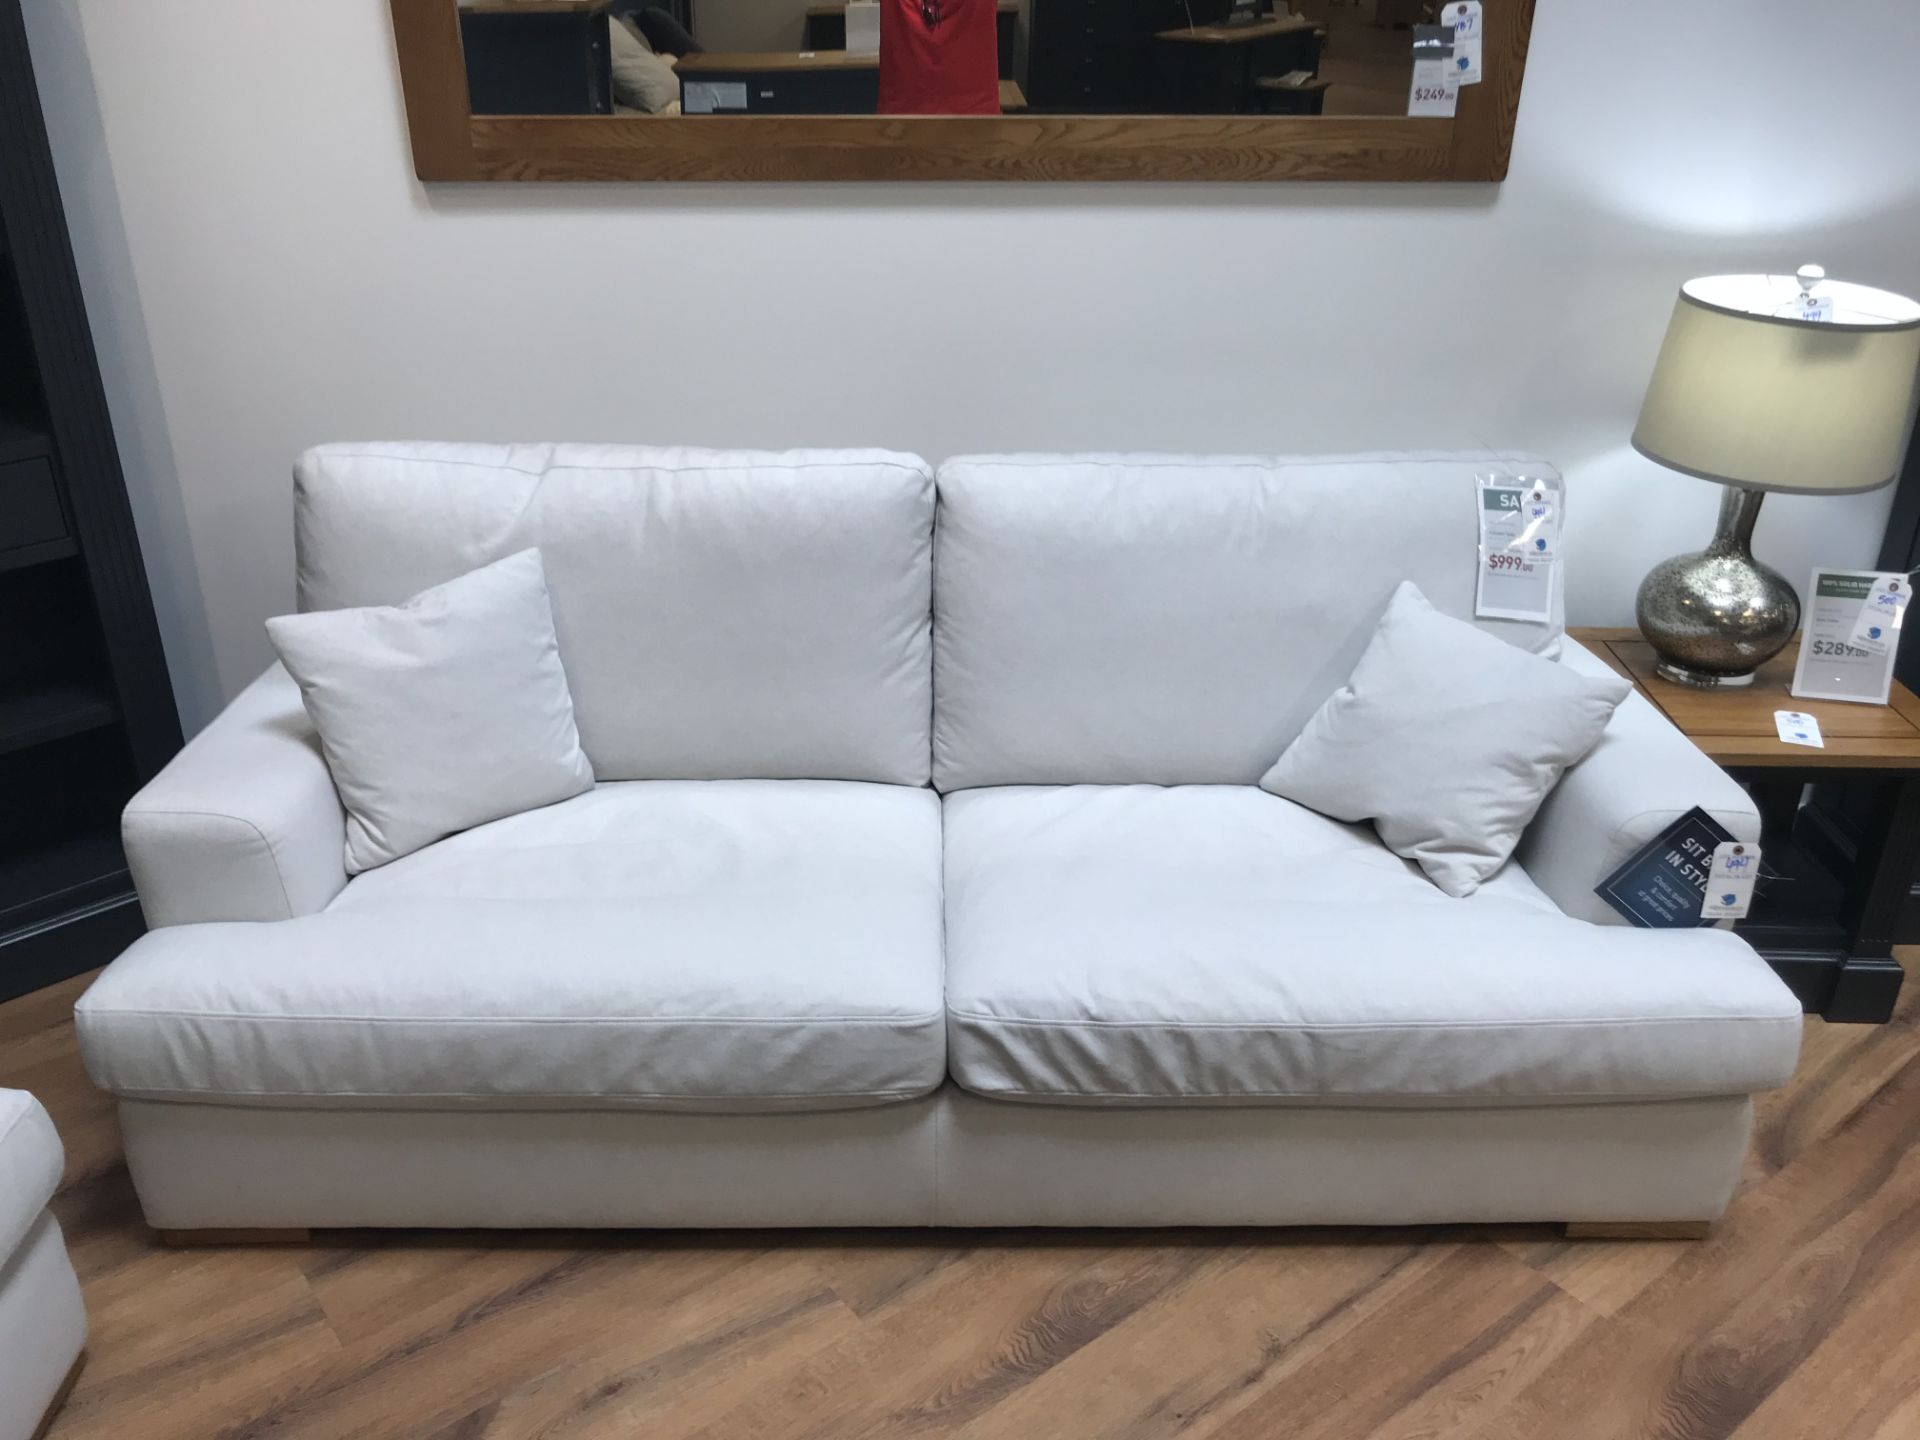 3 Seater Sofa (Temptation) See Picture For Dimensions and Product Info